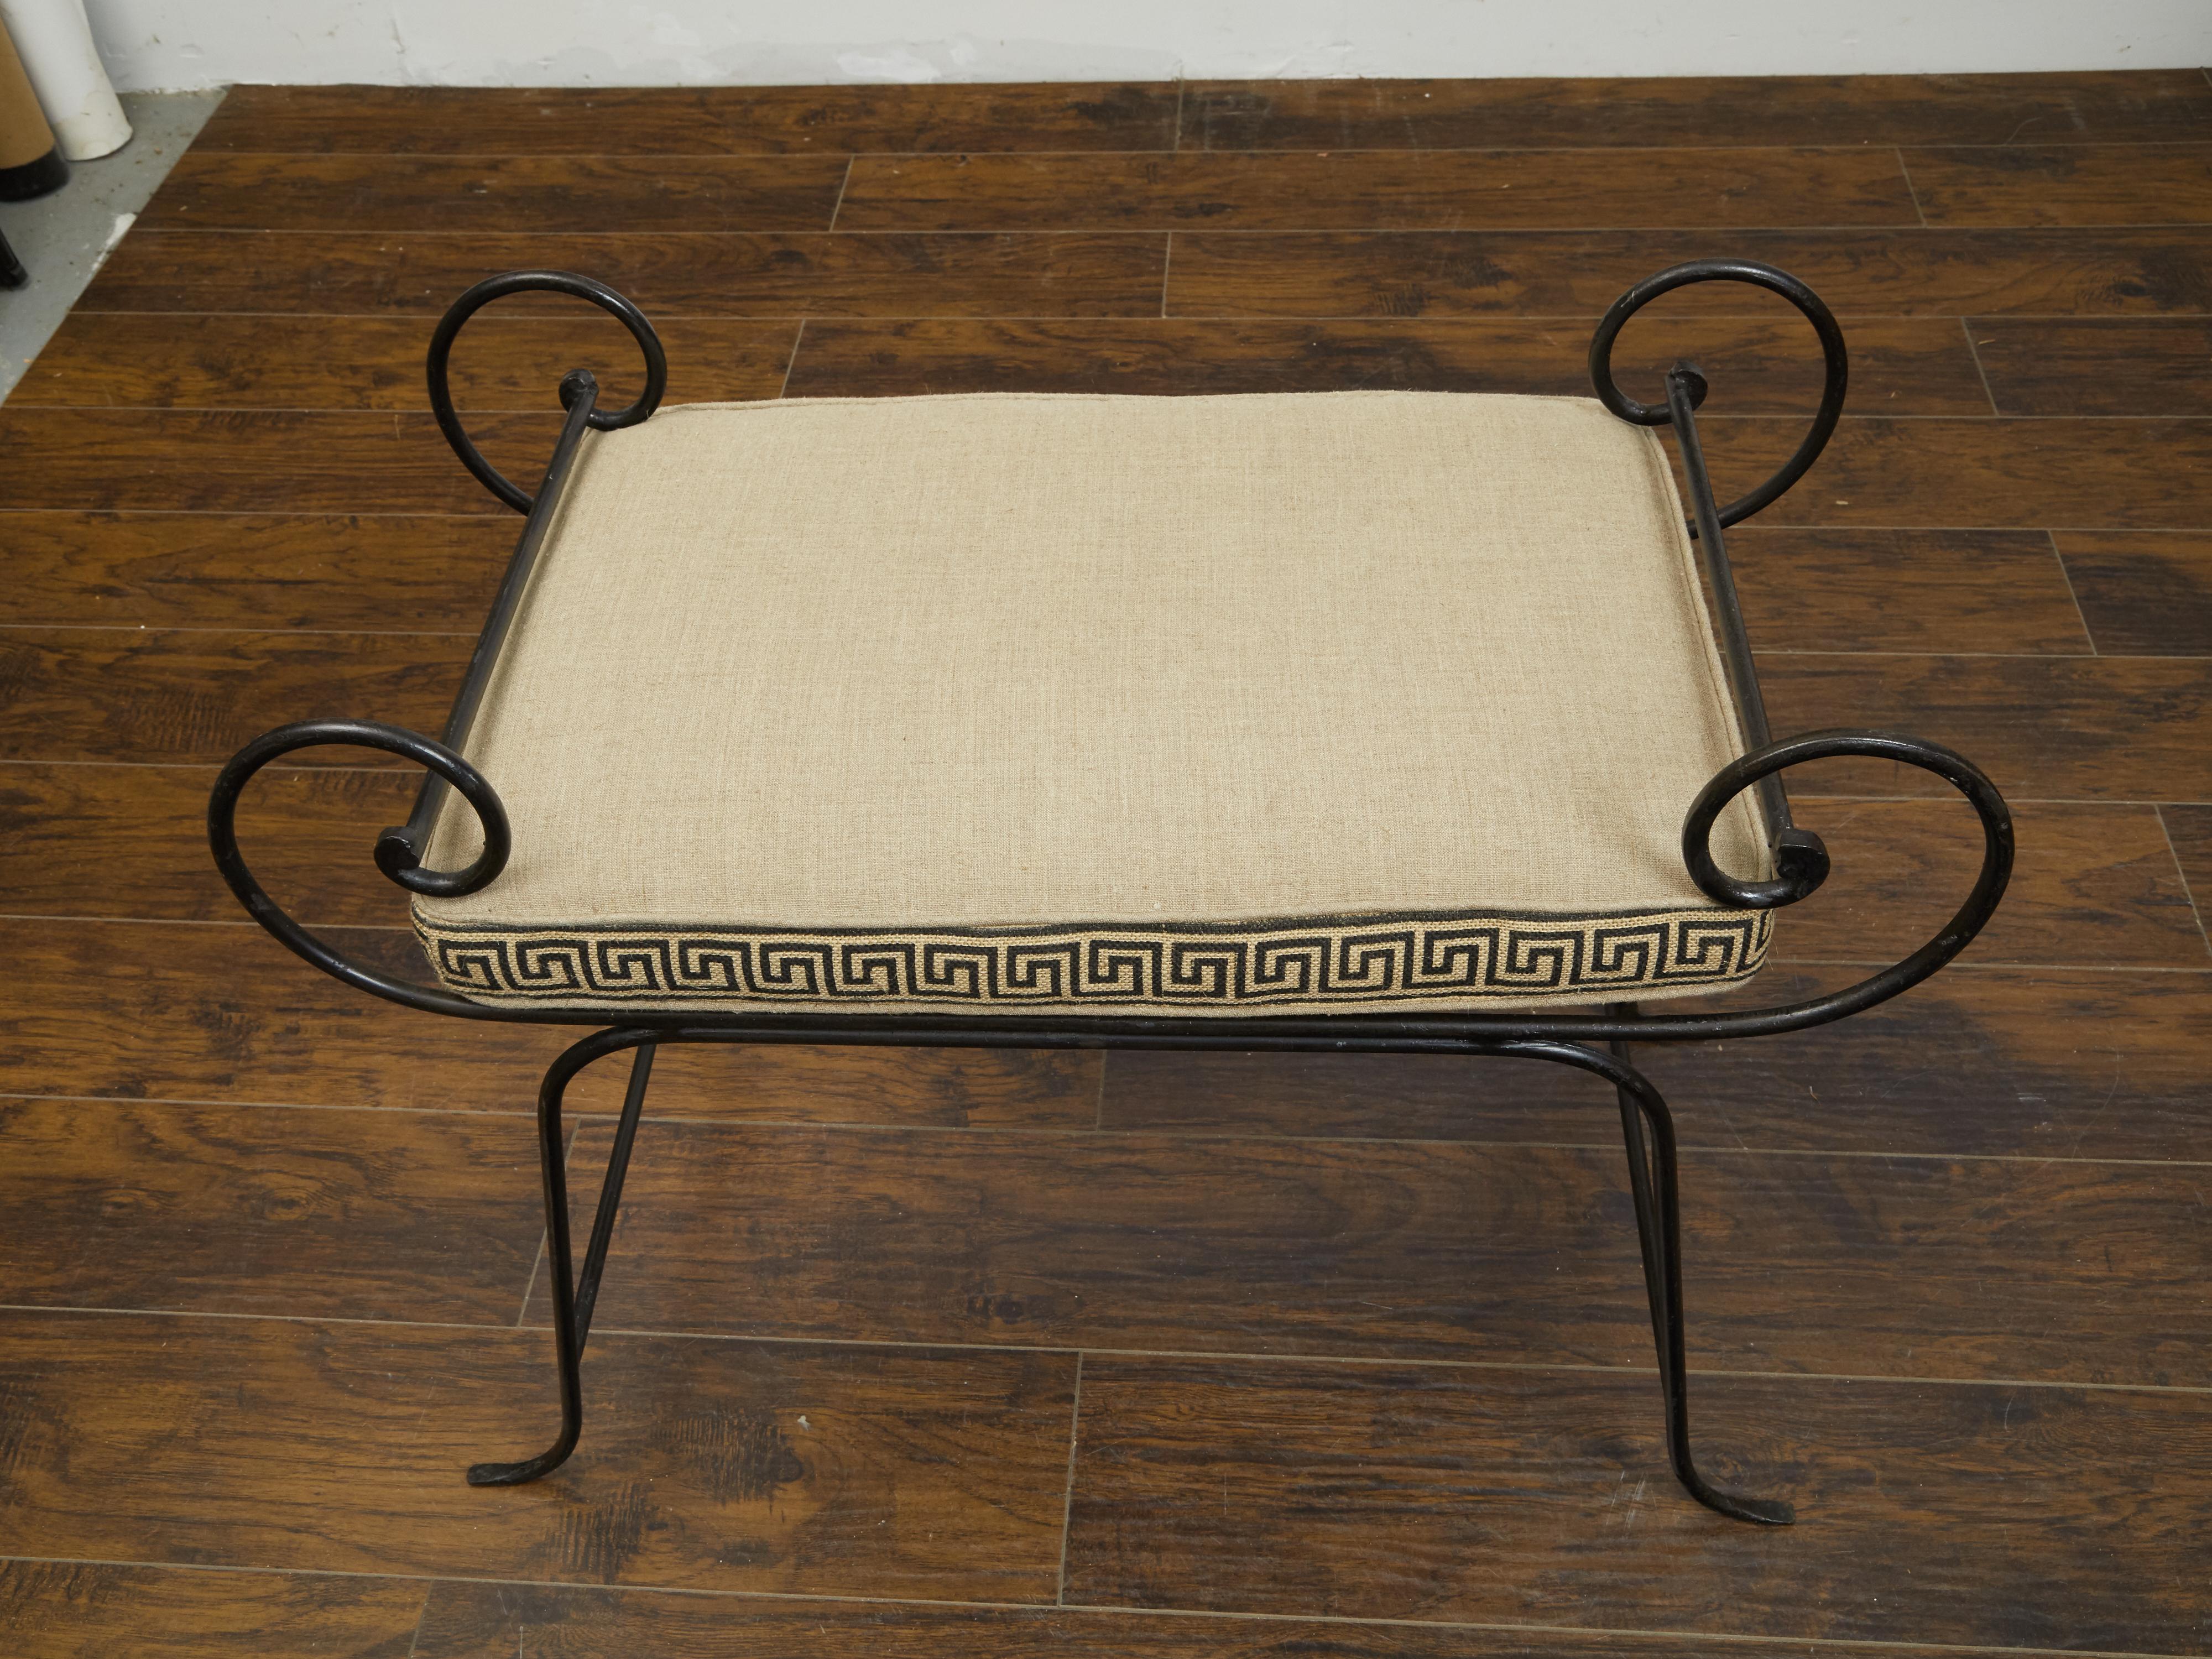 Vintage Midcentury Italian Iron Stool with Greek Key Embroidered Cushion For Sale 5